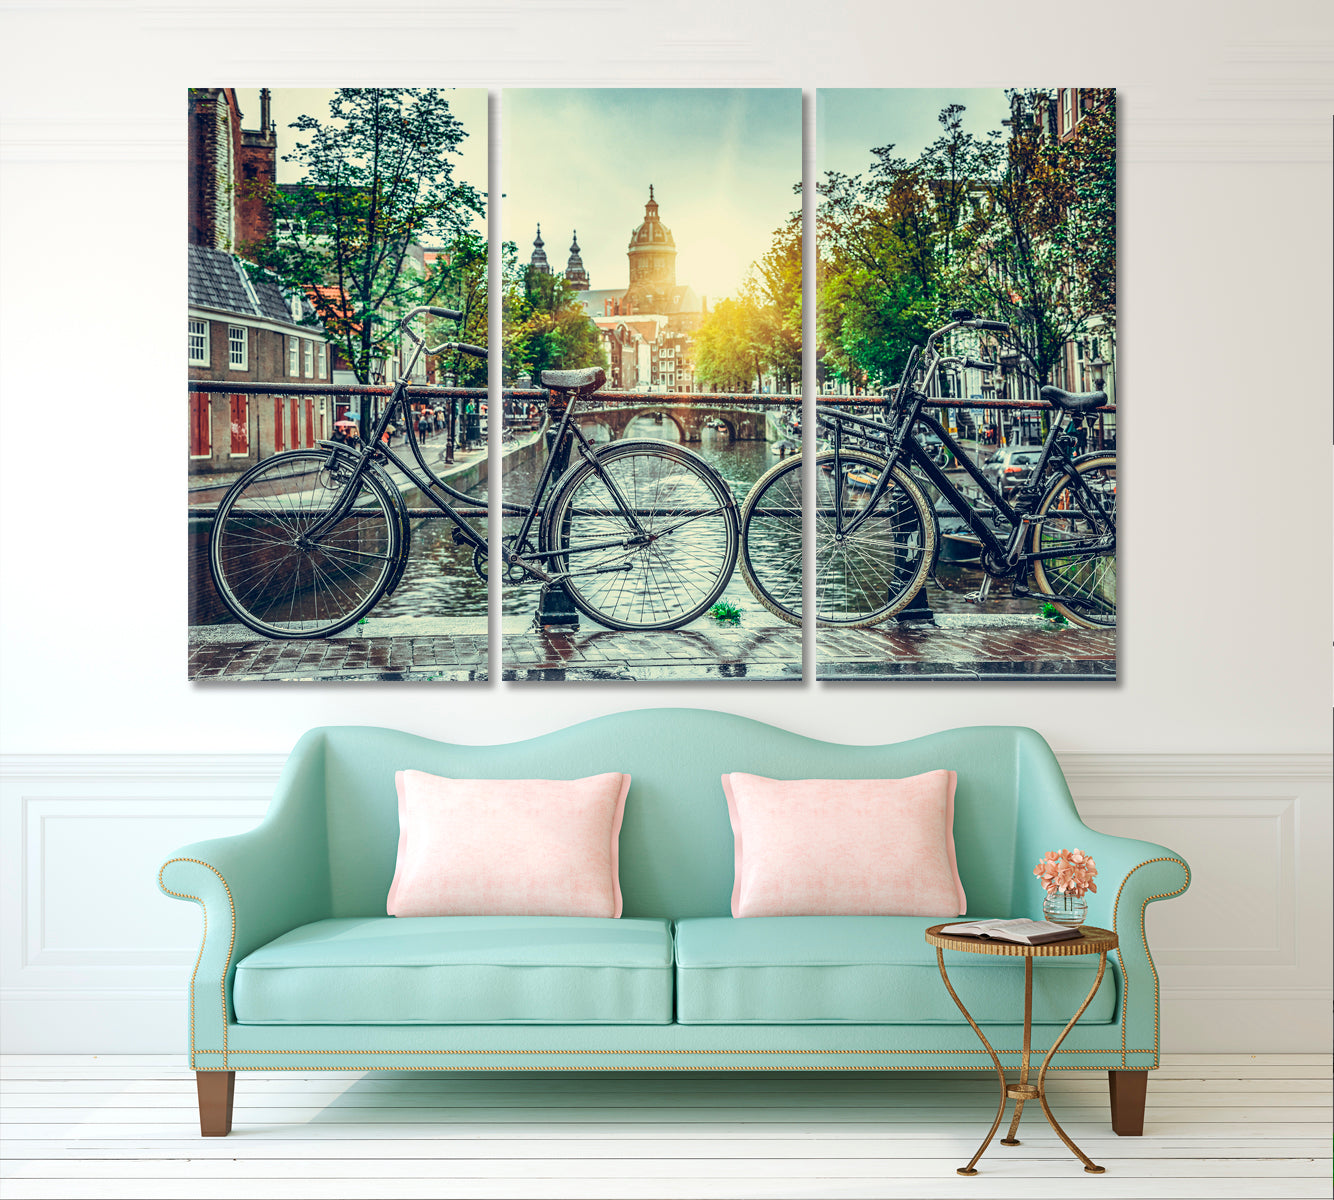 Bicycle Canal Bridge Amsterdam City Netherlands Old Streets Cities Wall Art Artesty 3 panels 36" x 24" 